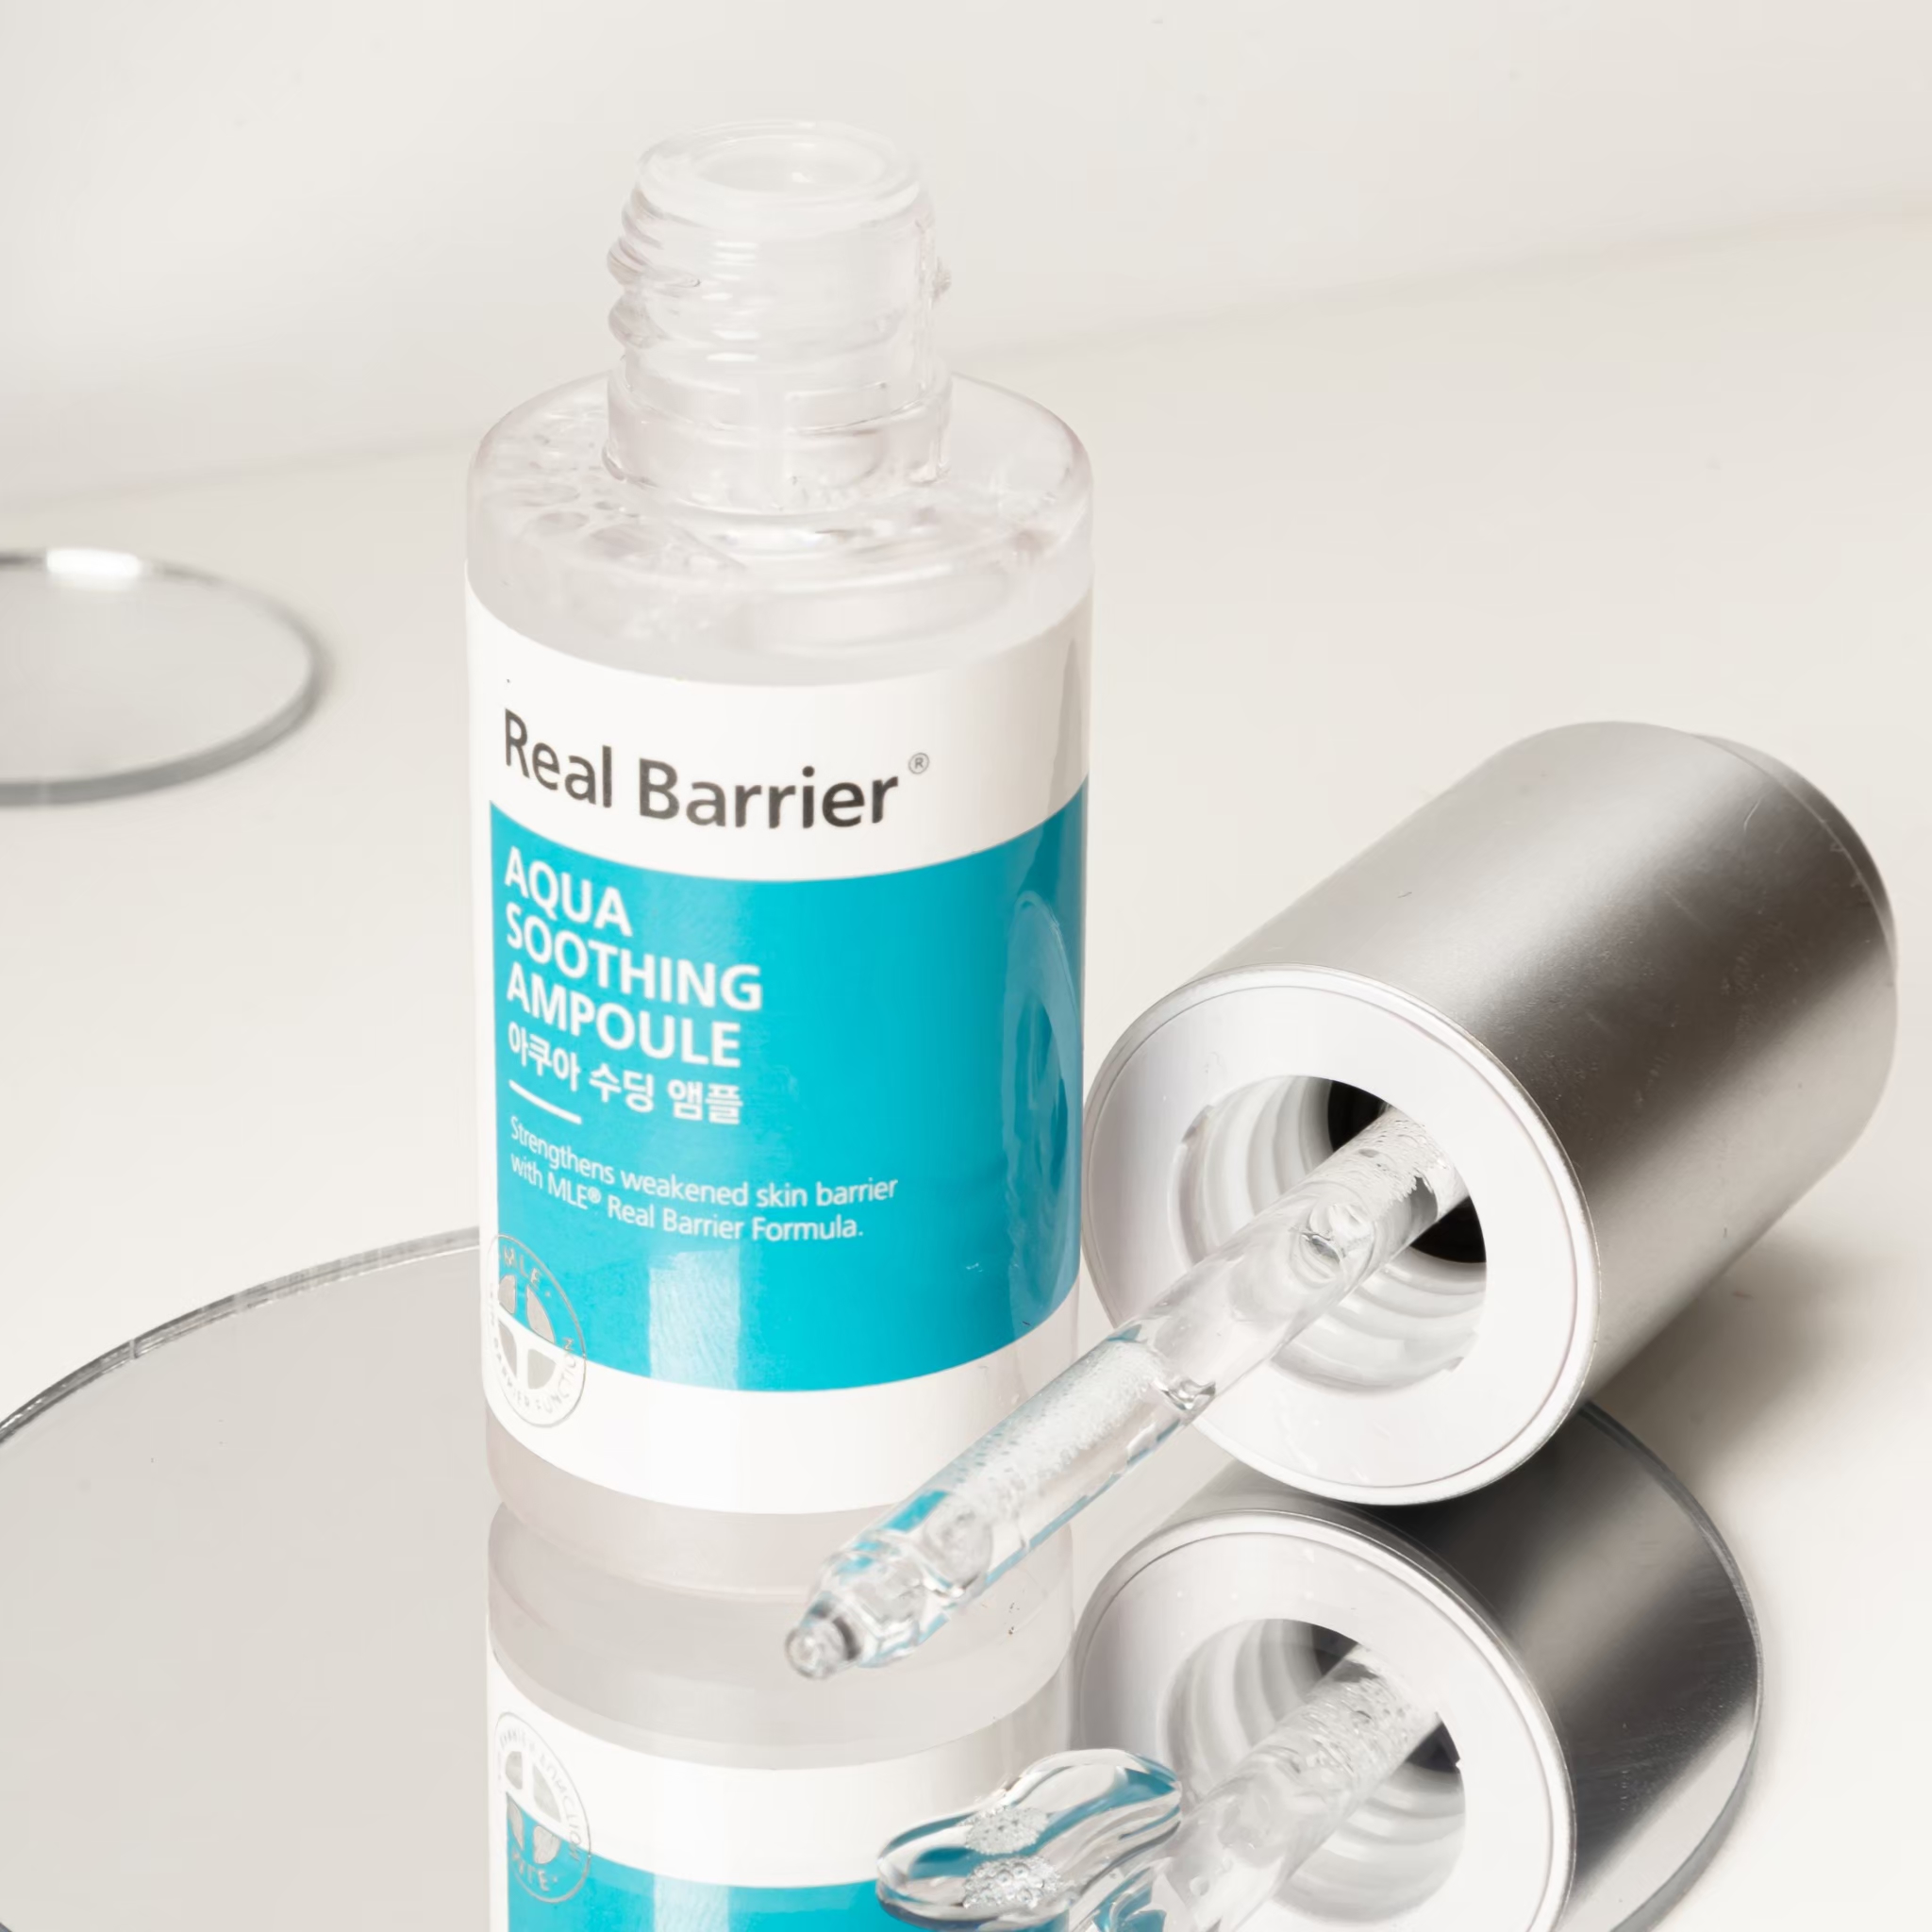 Real Barrier Aqua Soothing Ampoule 23784035 - фото 2